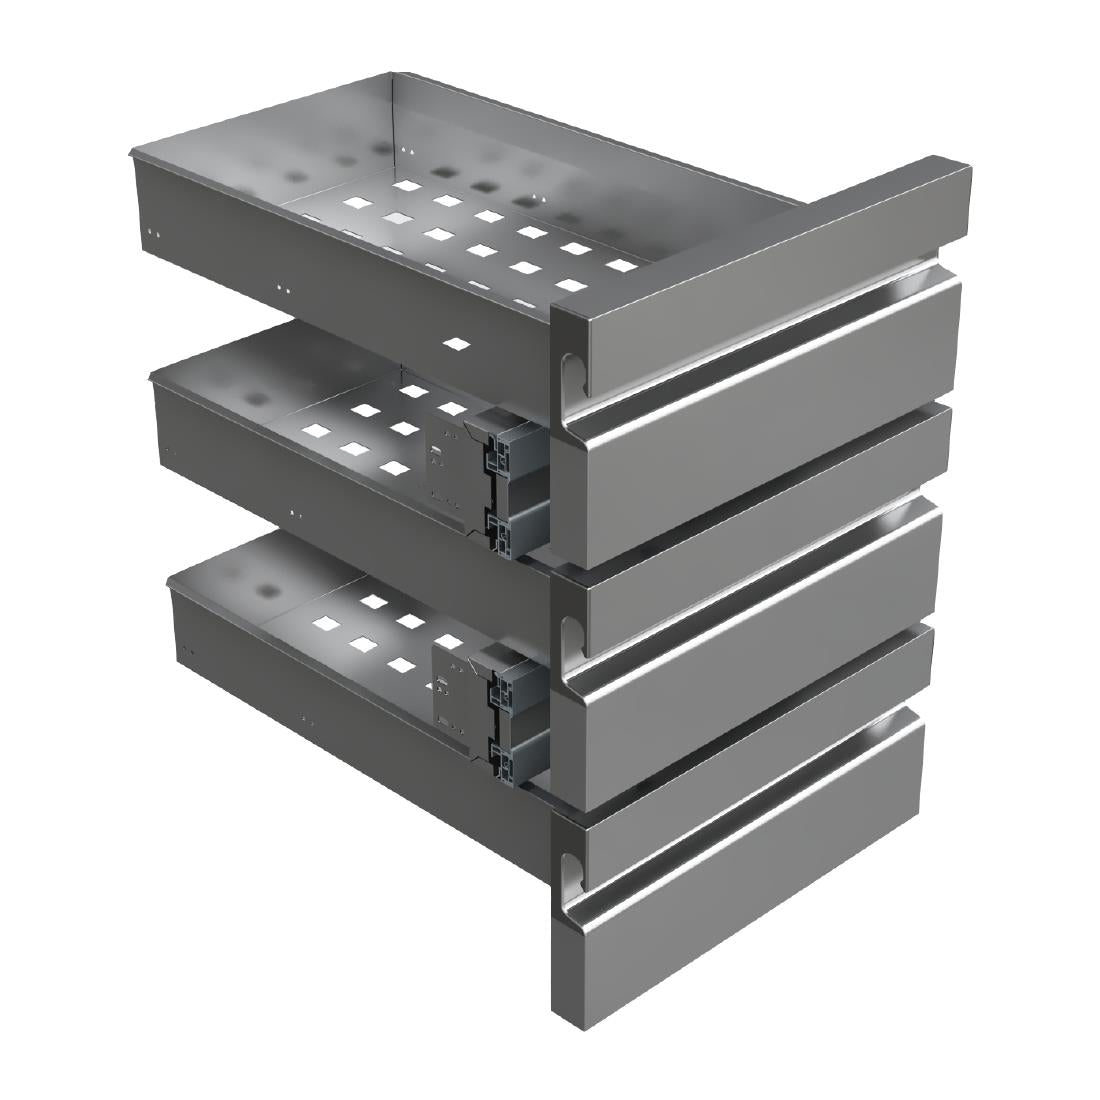 FU029 Fagor Concept Kit Drawers for Counter Units 1/3 & 1/3 & 1/3 JD Catering Equipment Solutions Ltd